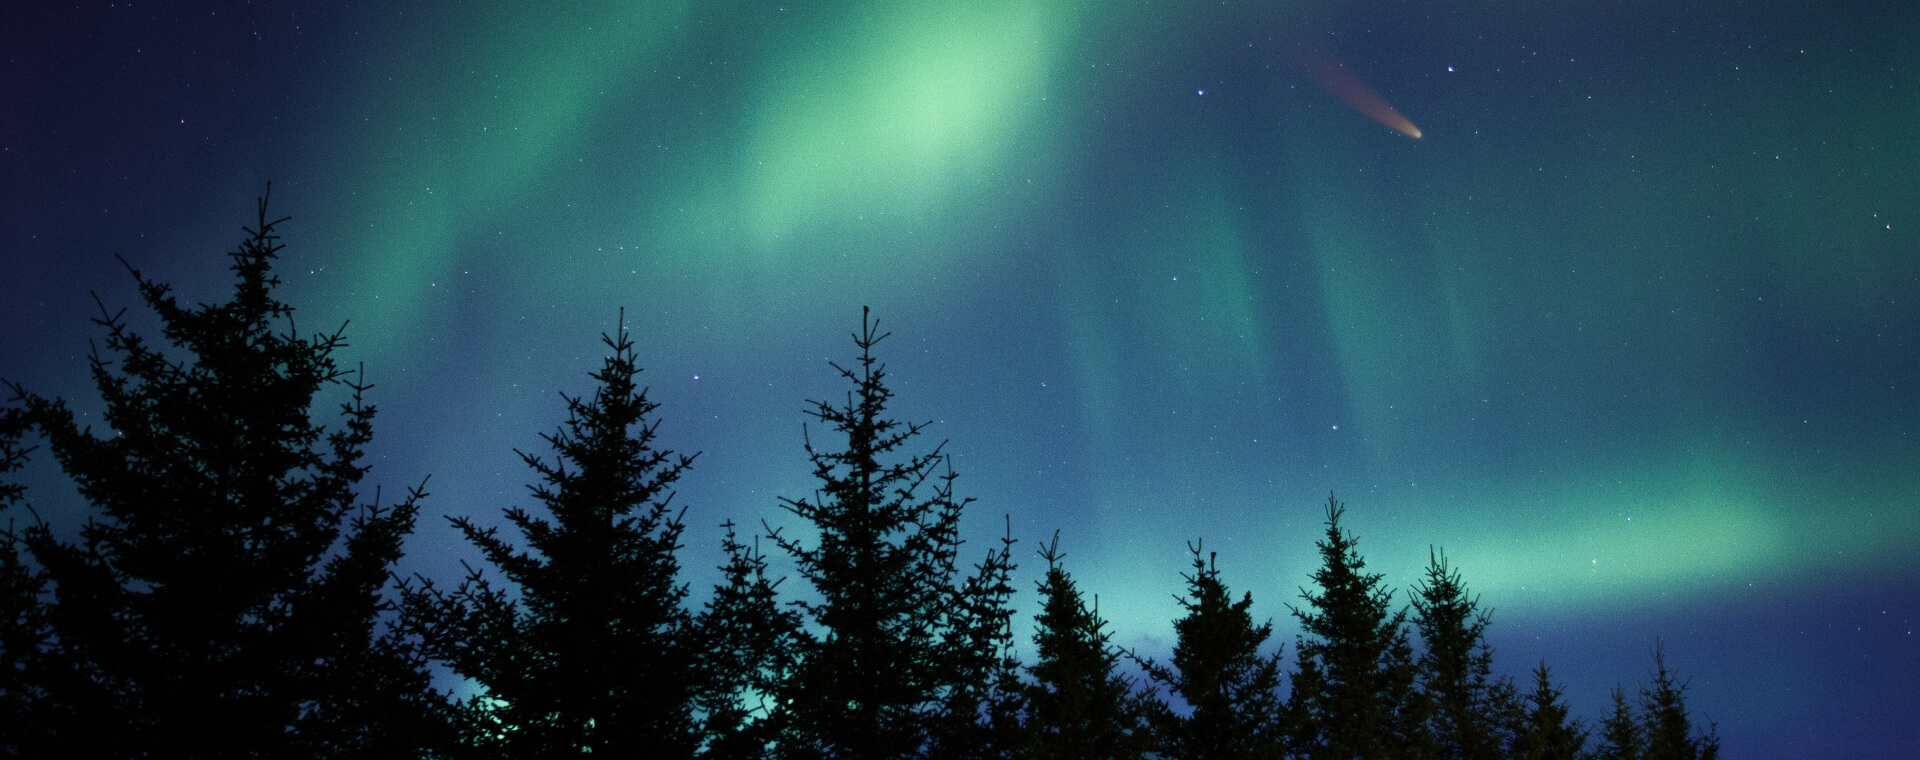 The aurora borealis lights up the sky over trees.